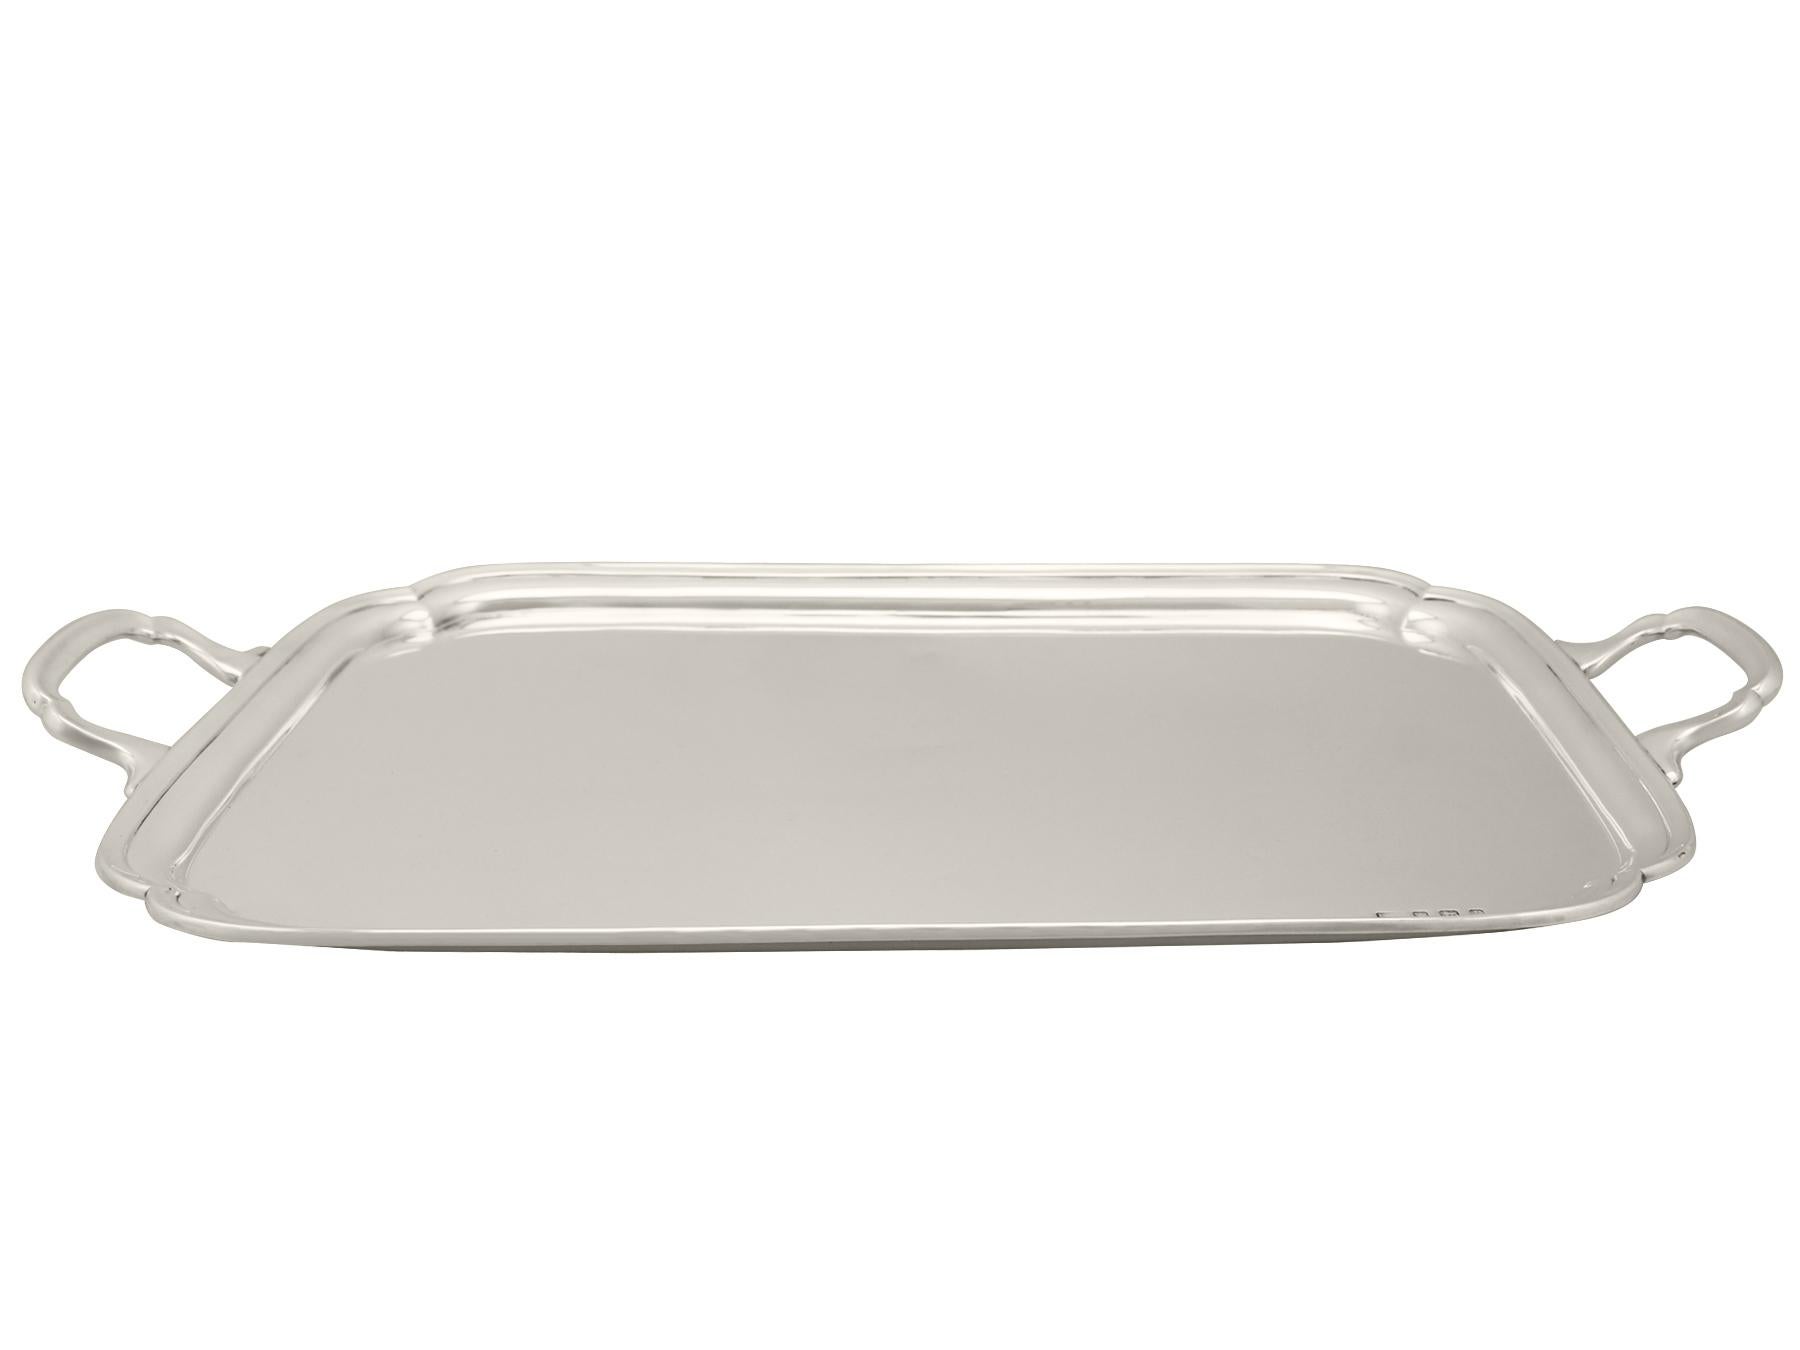 An exceptional, fine and impressive antique George V English sterling silver tray; part of our silverware collection.

This exceptional antique George V sterling silver tray has a rectangular shaped form with incurved corners.

The surface of